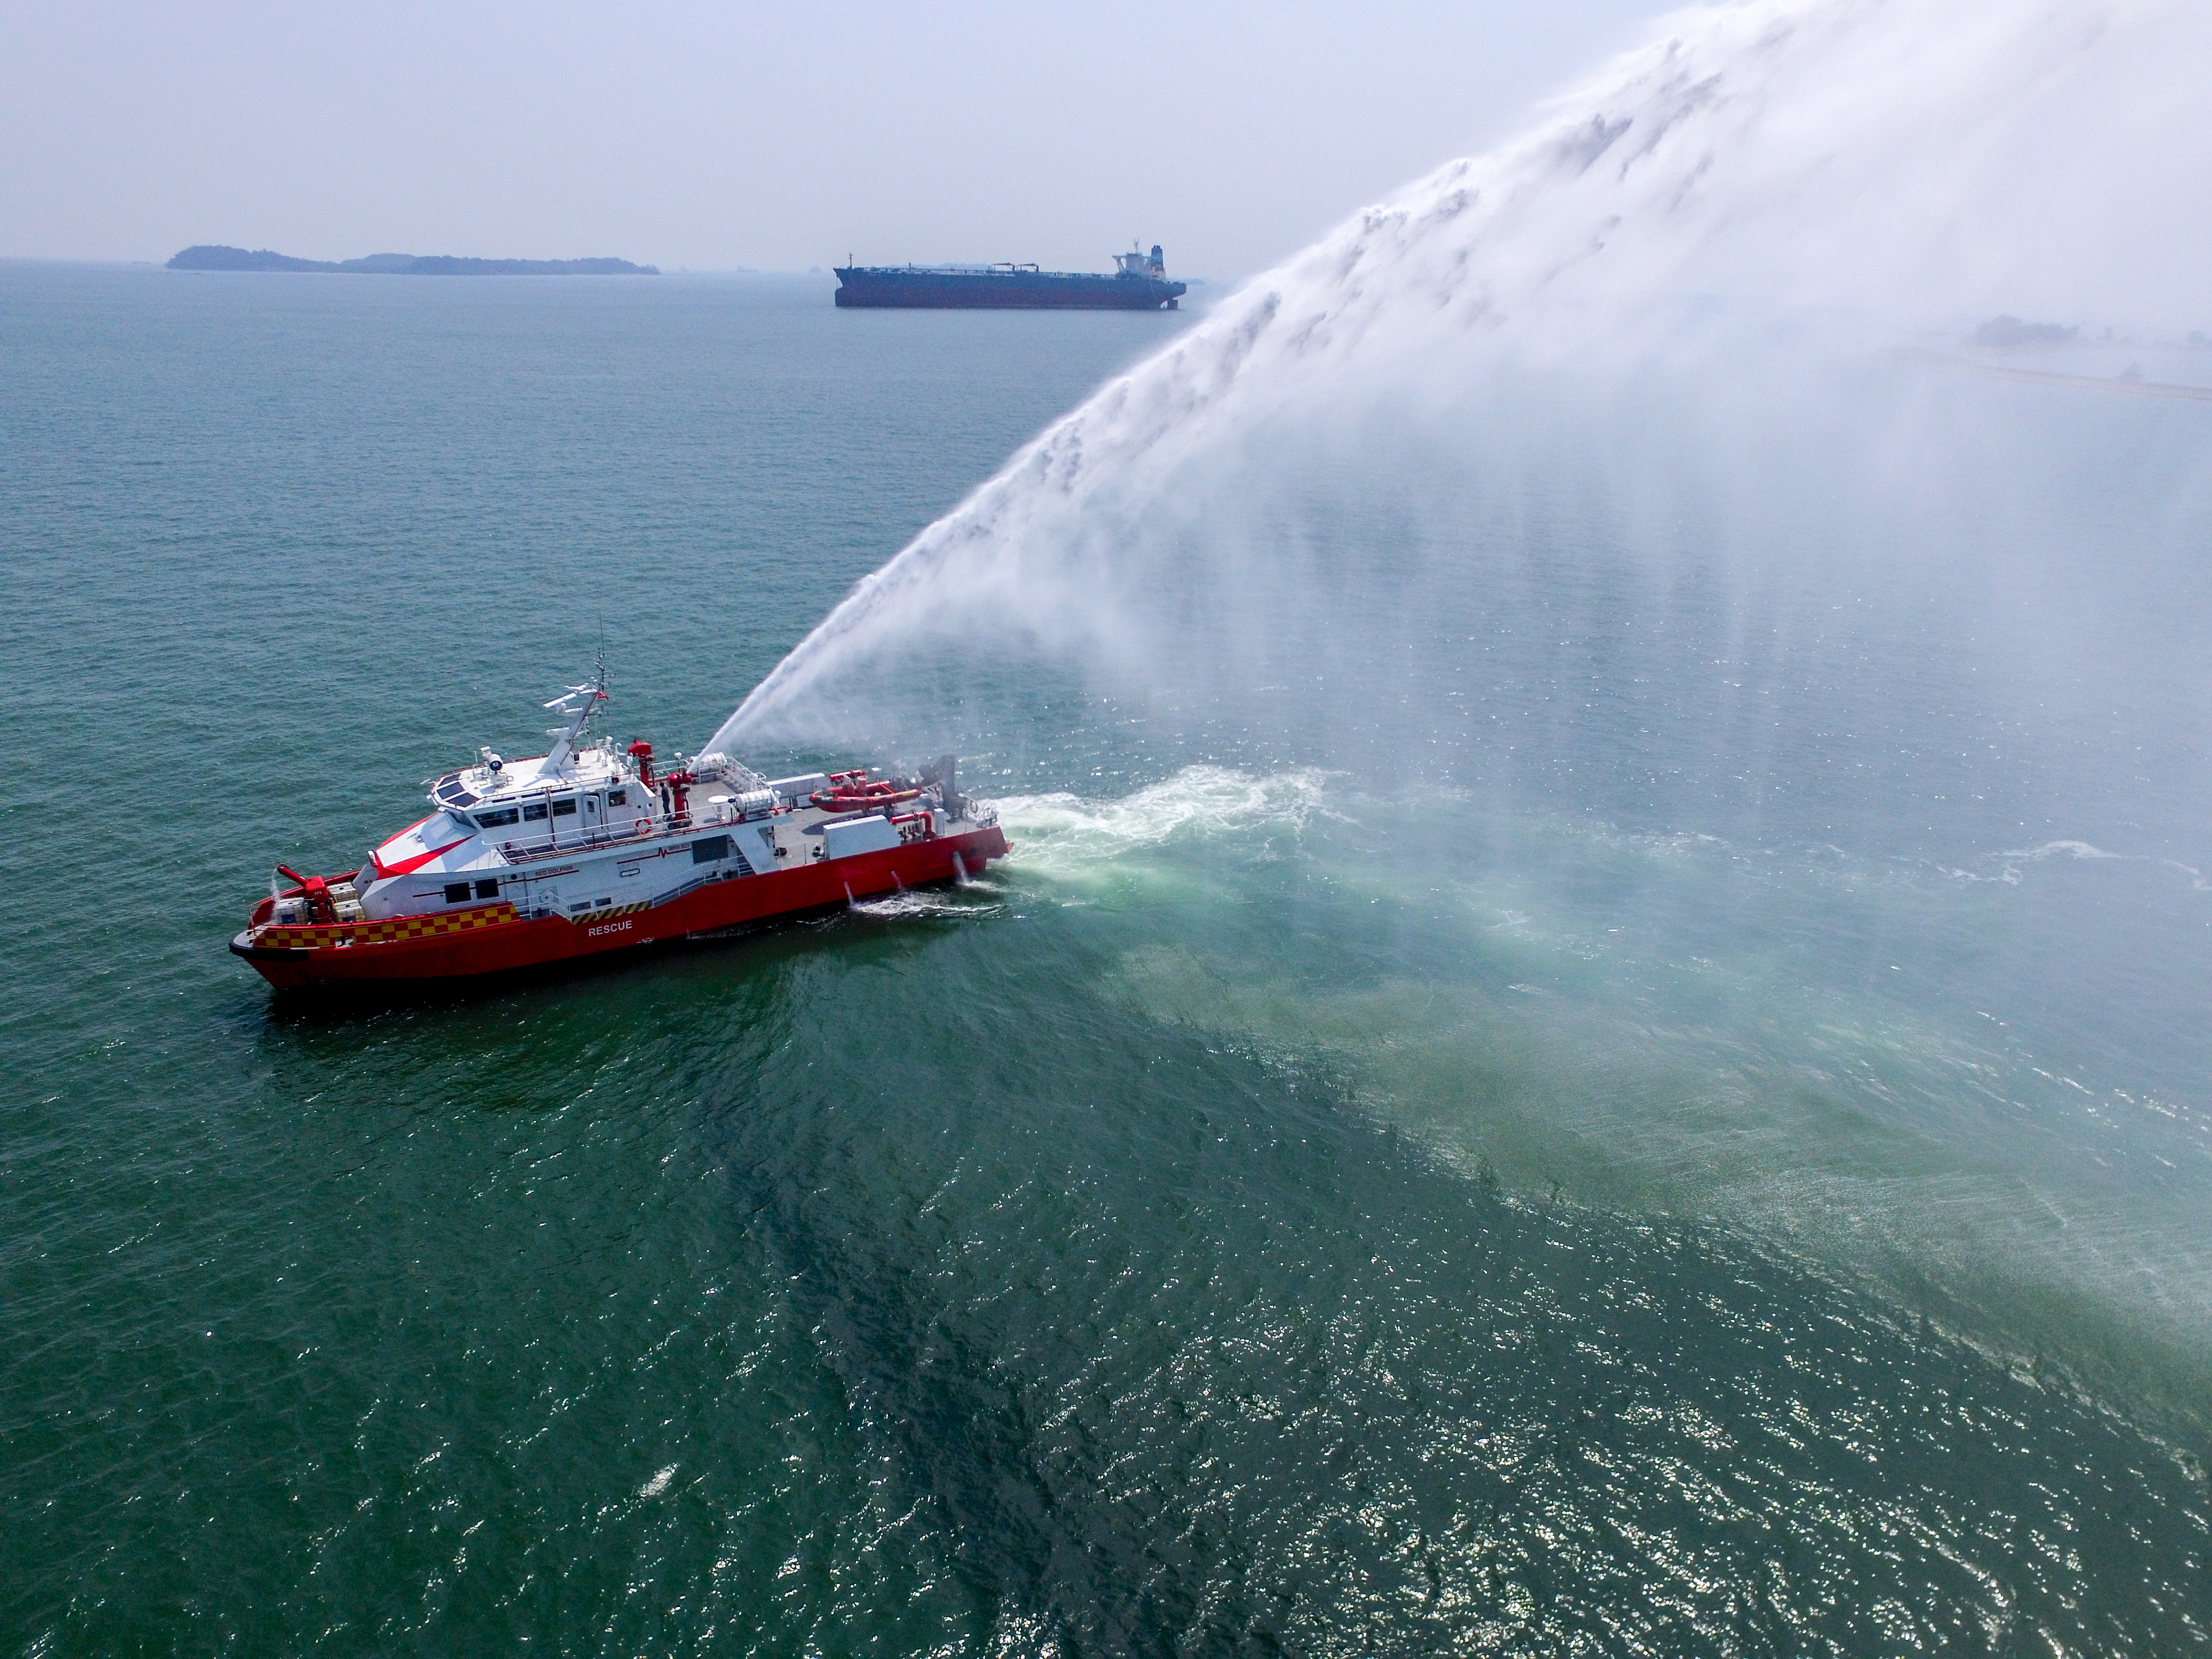 BMT to Design more Fire and Rescue Vessels for Singapore